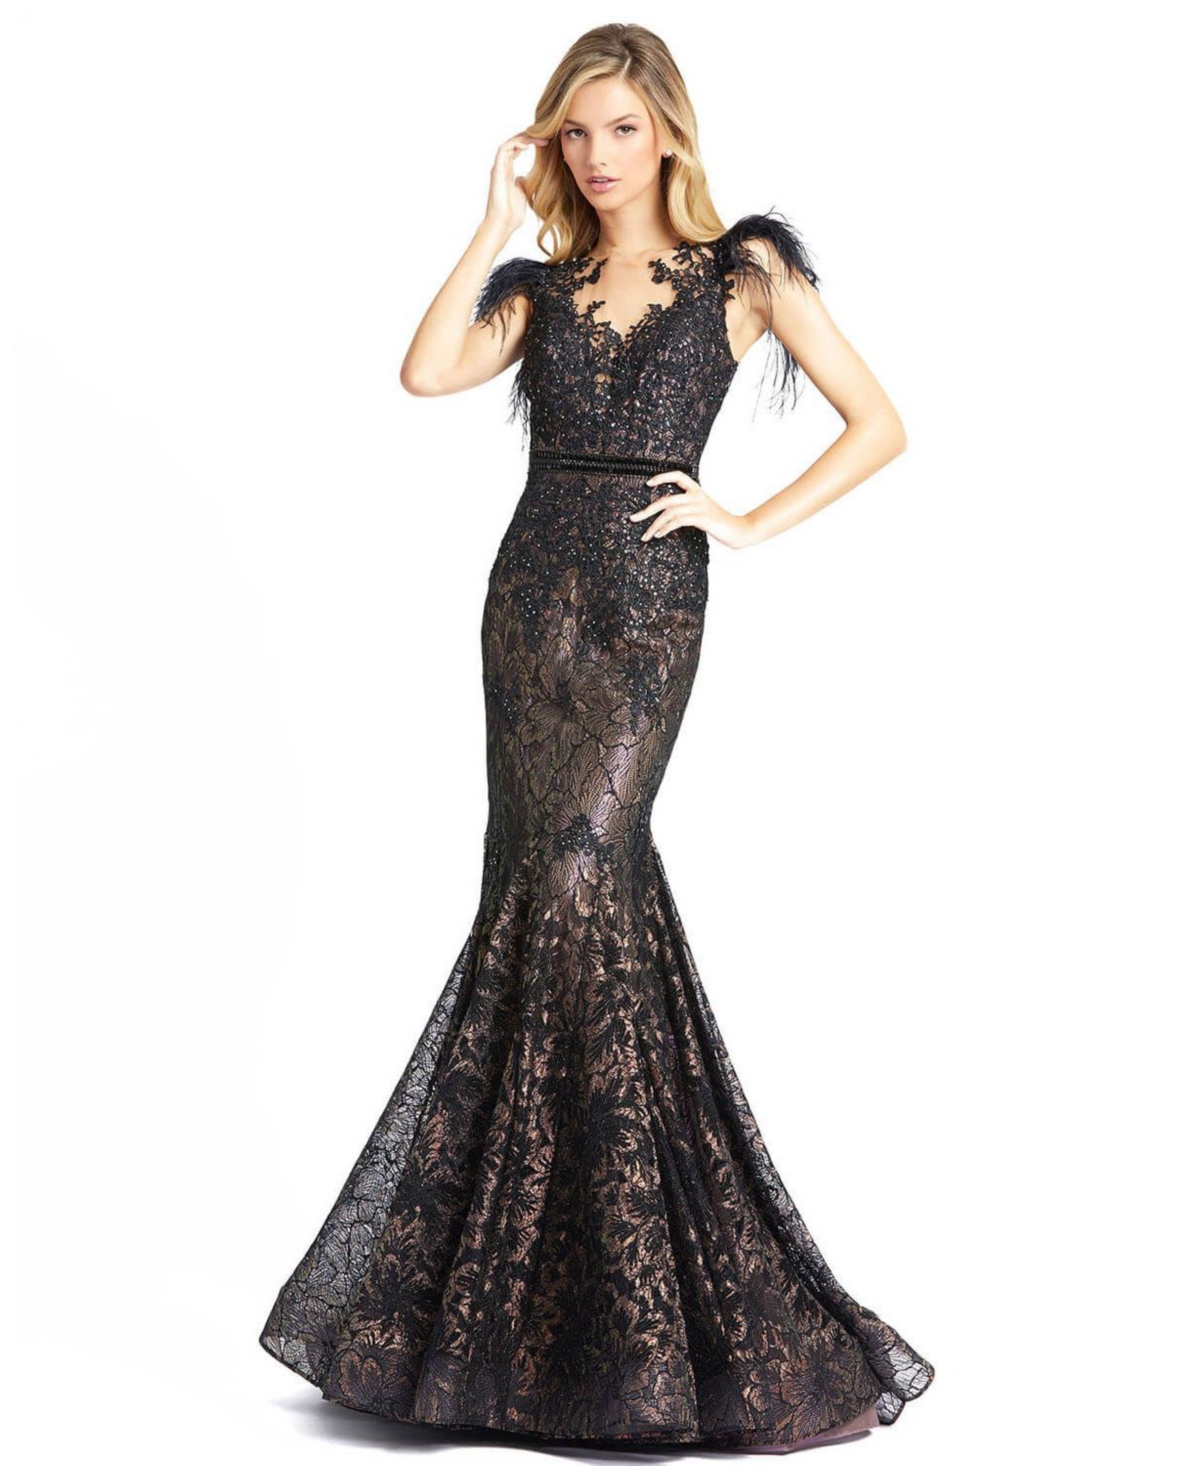 Women's Women's Embellished Feather Cap Sleeve Illusion Neck Trumpet Gown - Black